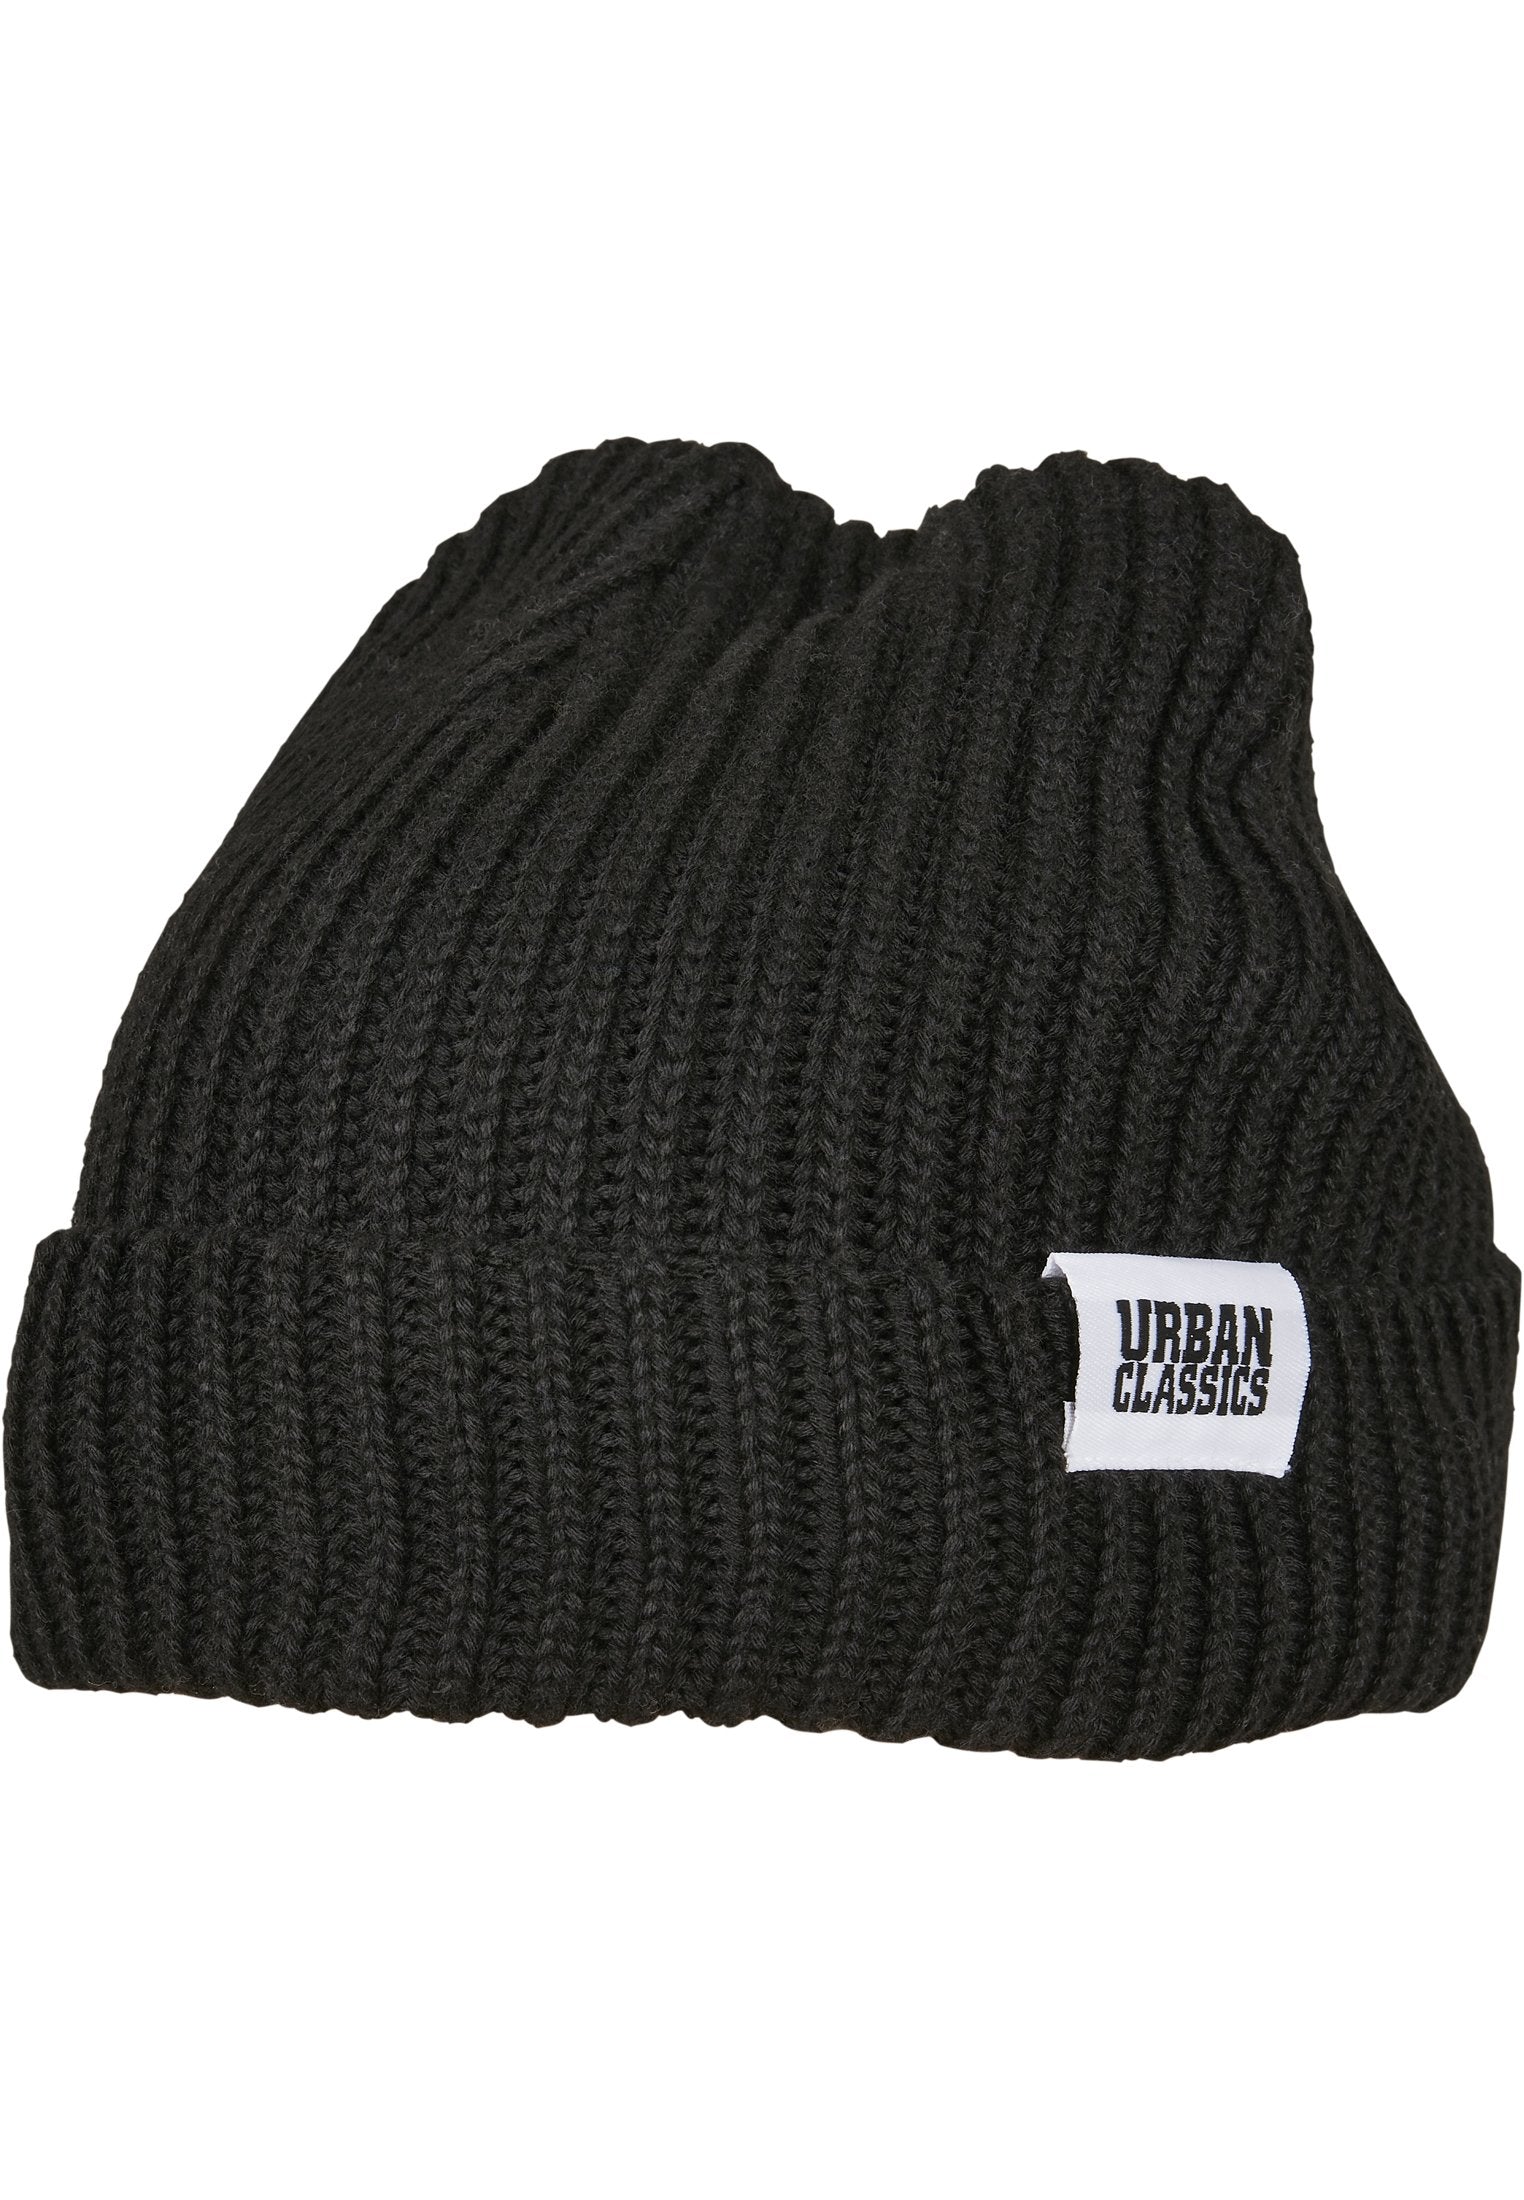 Recycled Yarn Fisherman Beanie - PLANT products